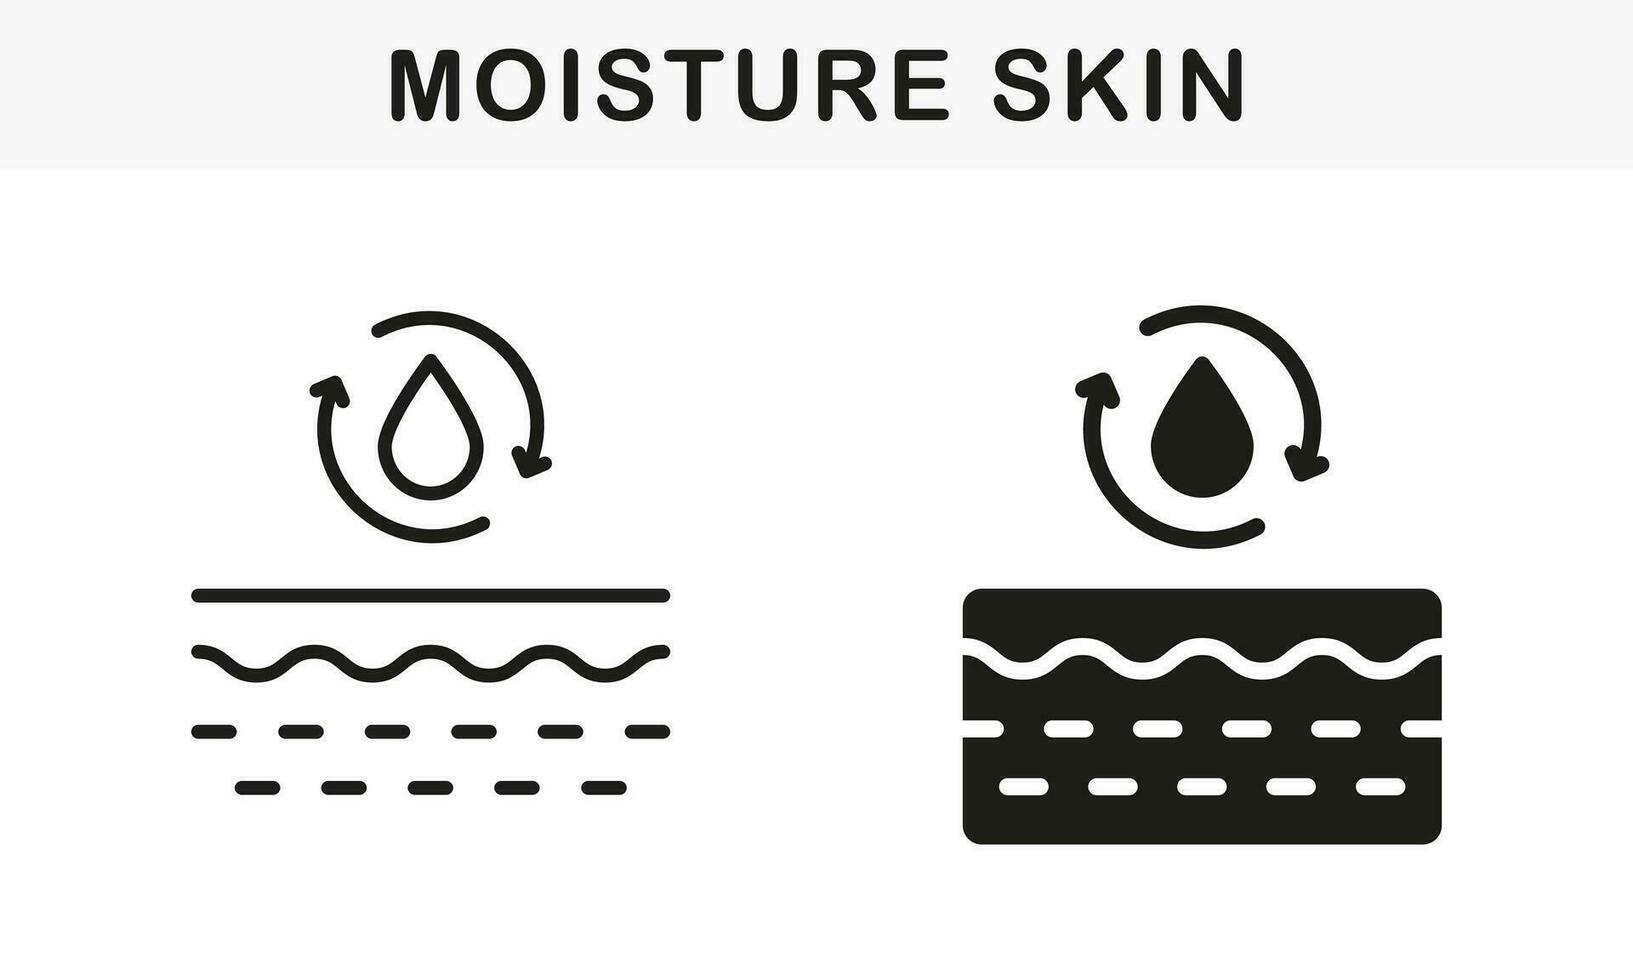 Moisture Skin Line and Silhouette Black Icon Set. Water Drop with Arrow and Skin Layer Pictogram. Skin Absorb Liquid Vitamin, Gel, Serum, Cream Symbol Collection. Isolated Vector Illustration.